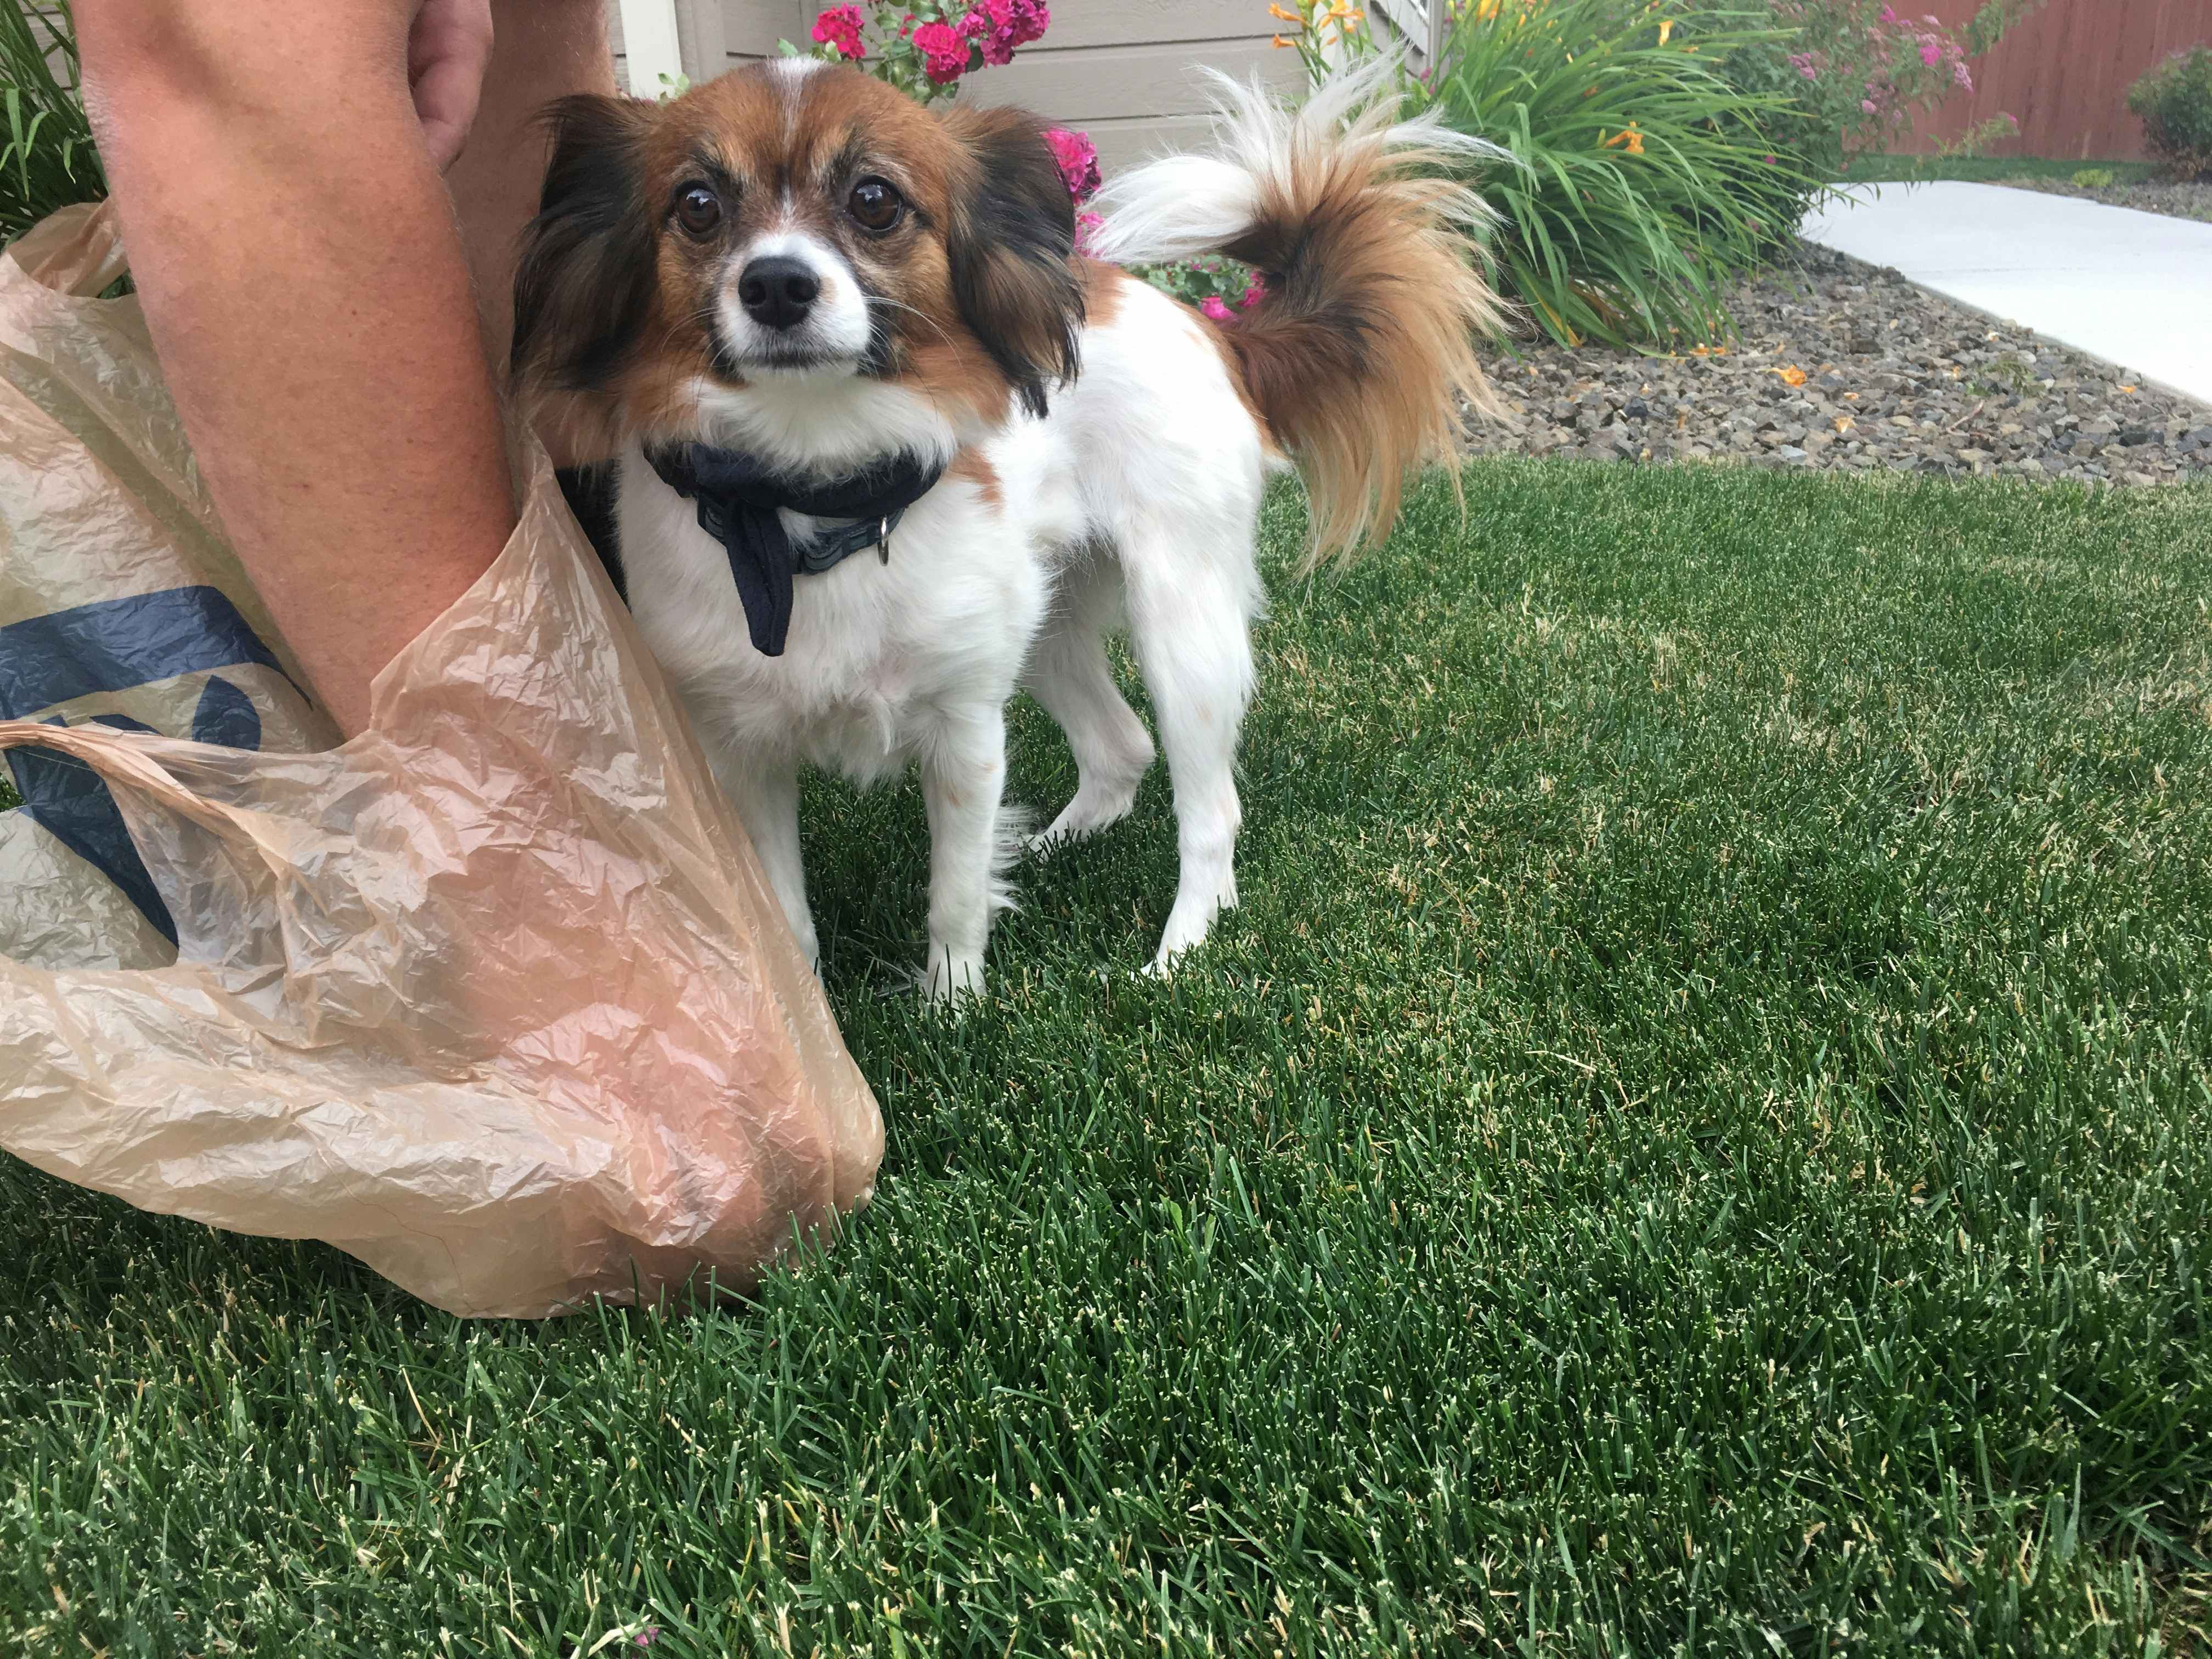 A person's hand using a grocery bag to pick up after their dog that is standing next to them on the grass.